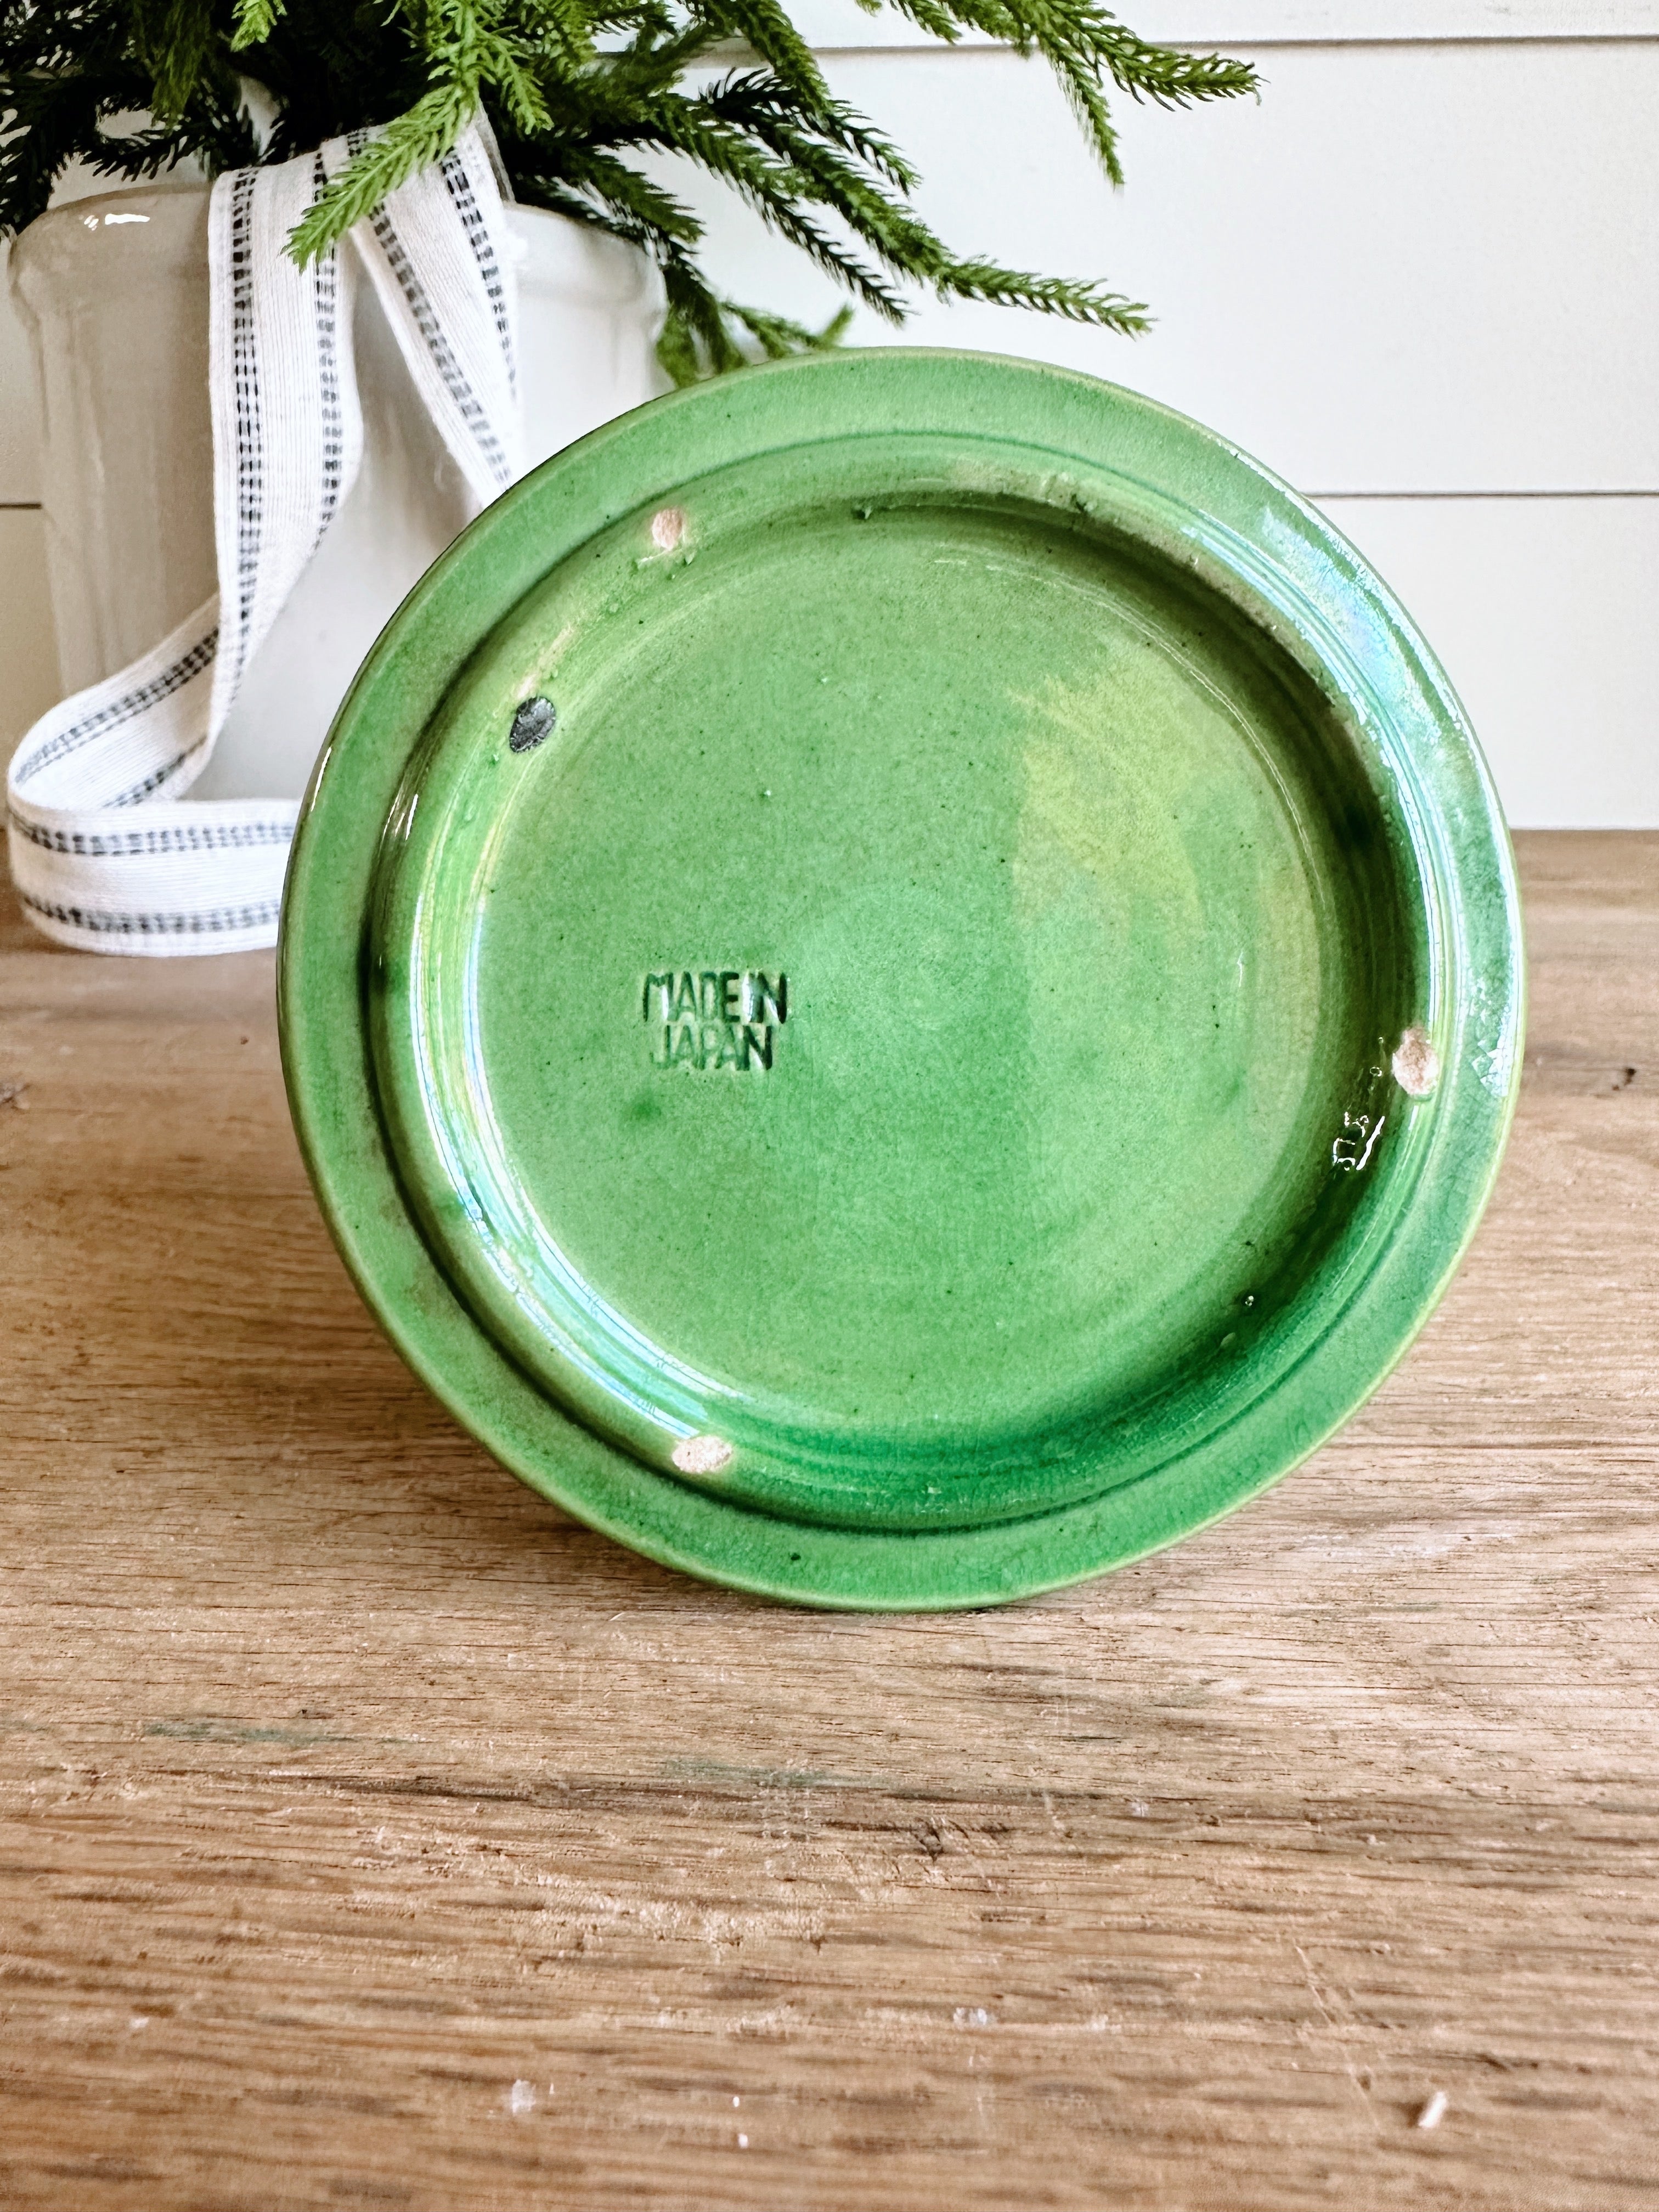 You Choose the Scent - Japan Stamped Green Canister Vintage Vessel Candle